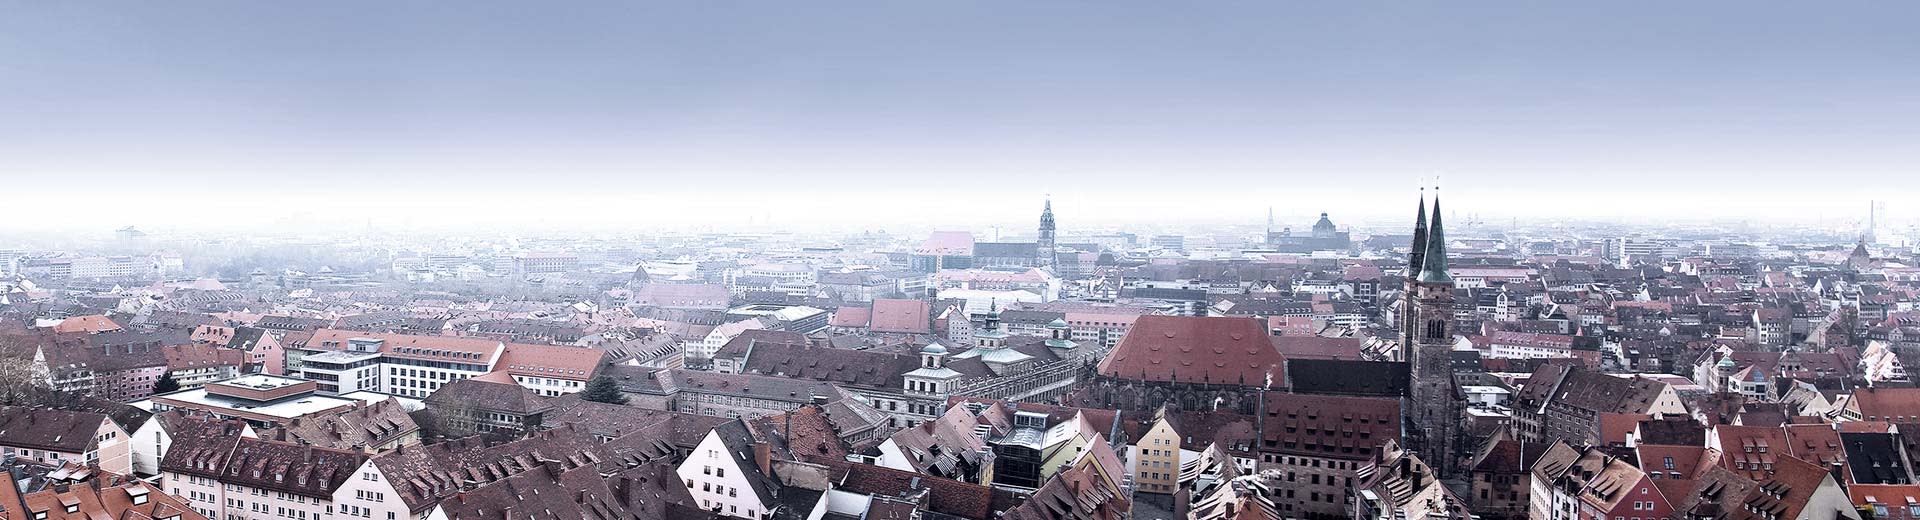 The red roofs and church steepls of historic Nuremberg.